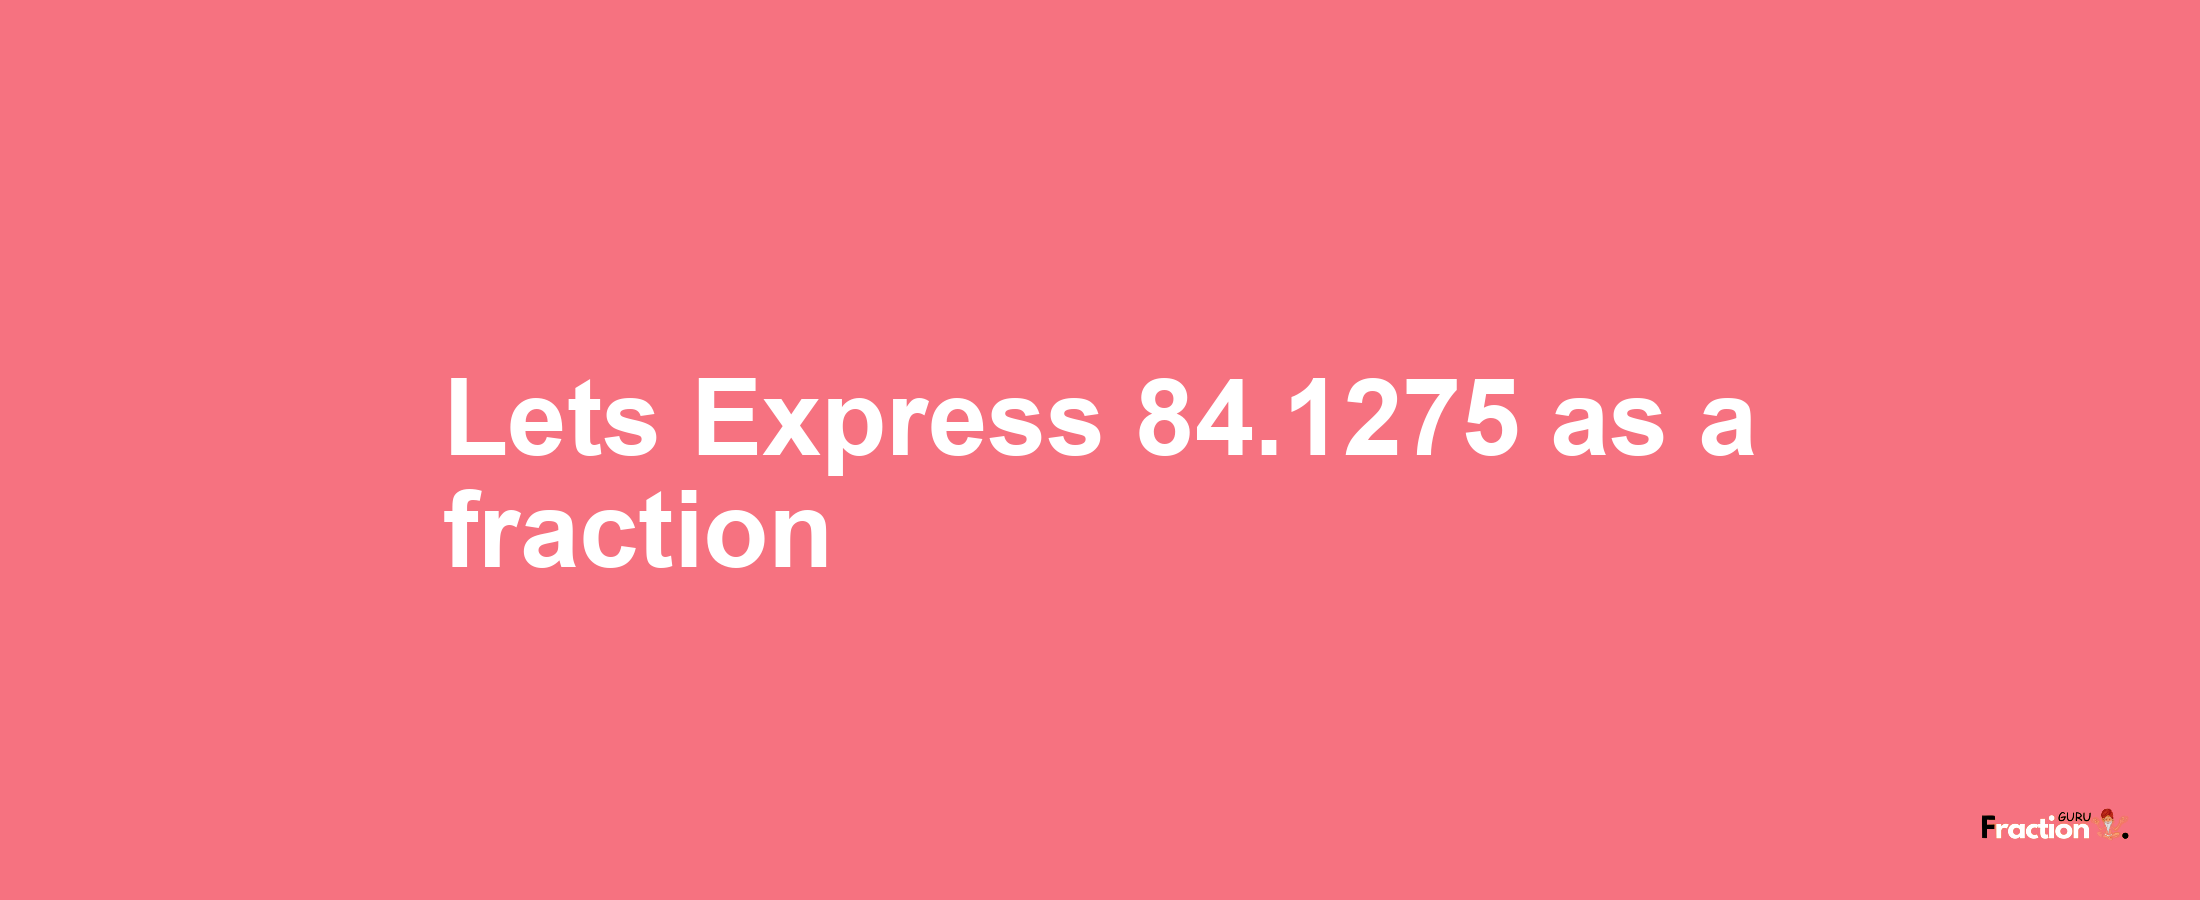 Lets Express 84.1275 as afraction